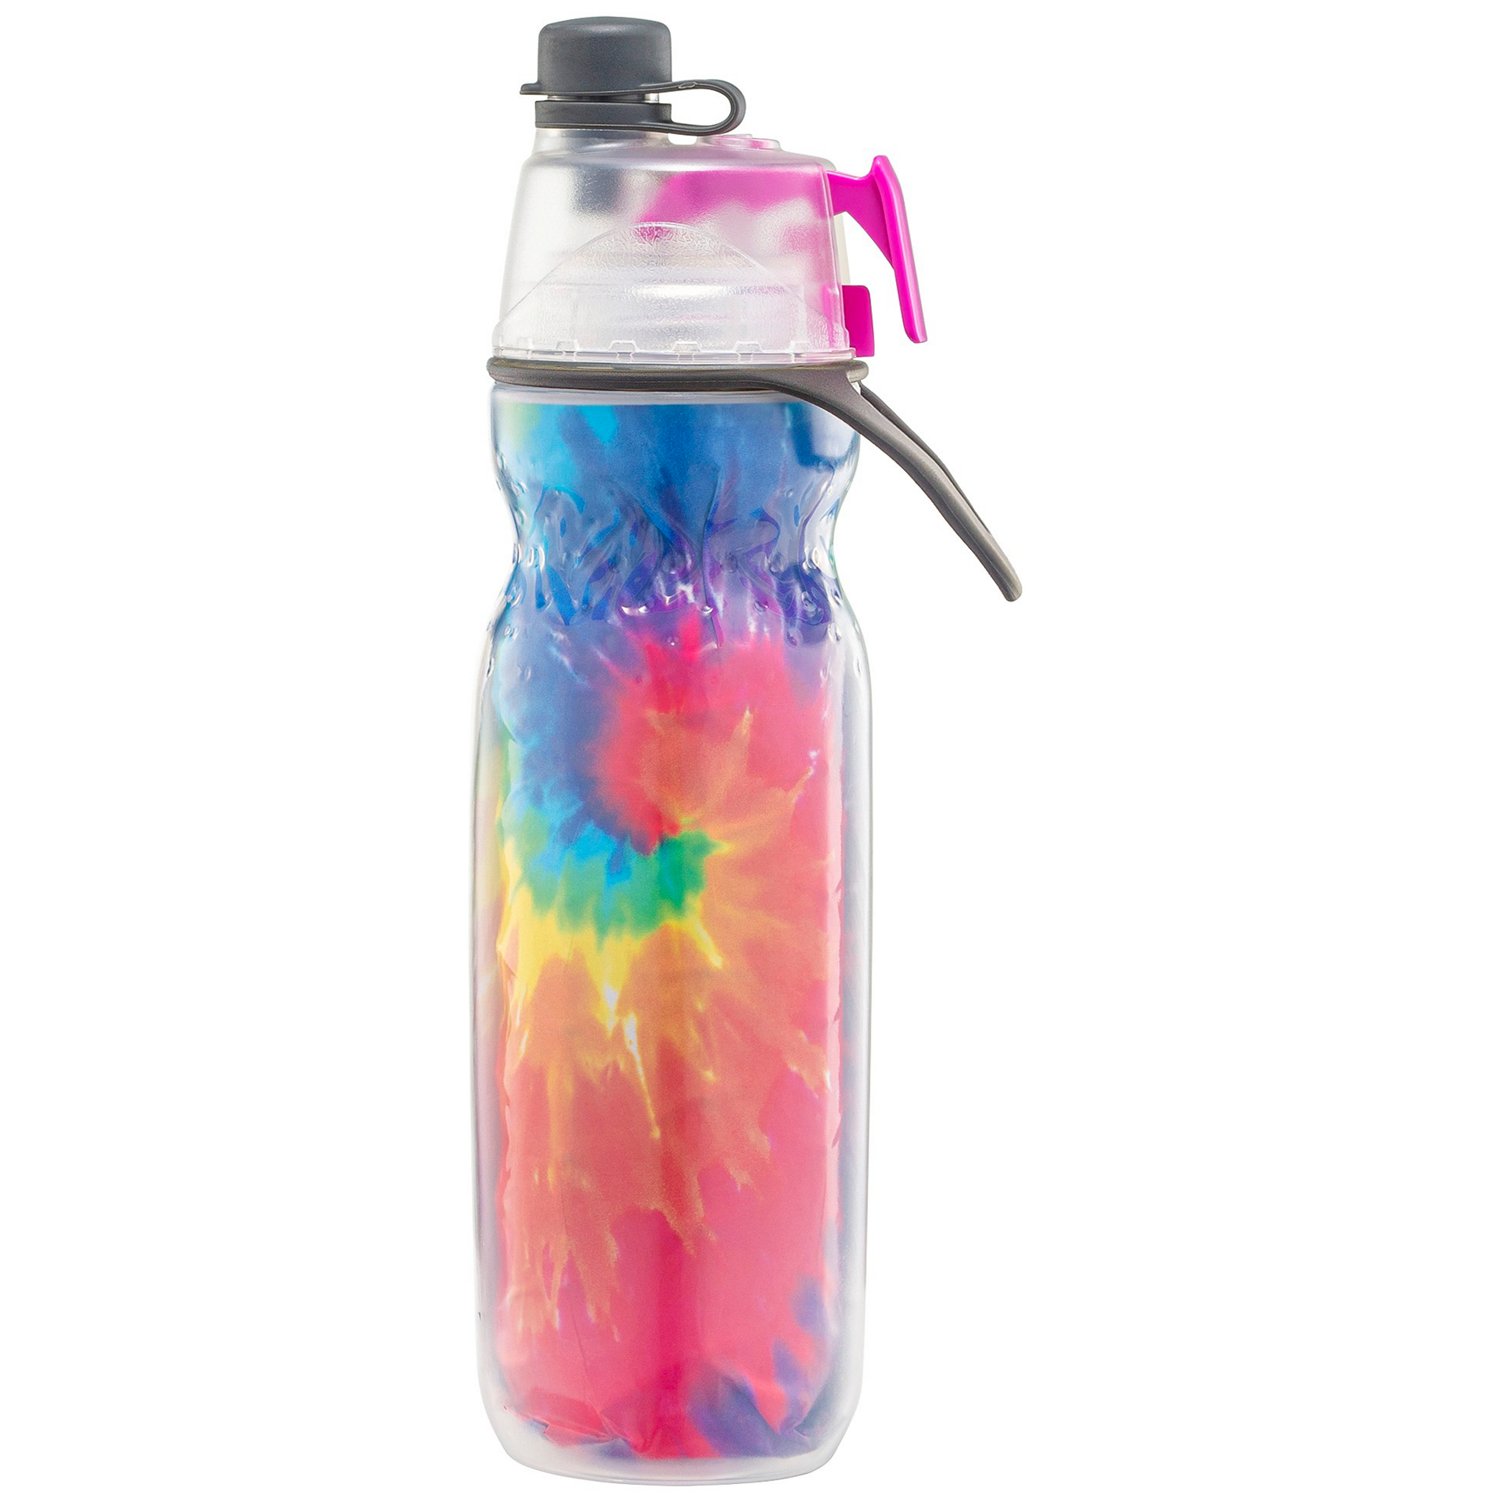 O2COOL Mist and Sip Water Bottle for Drinking and Misting, 2 Pack